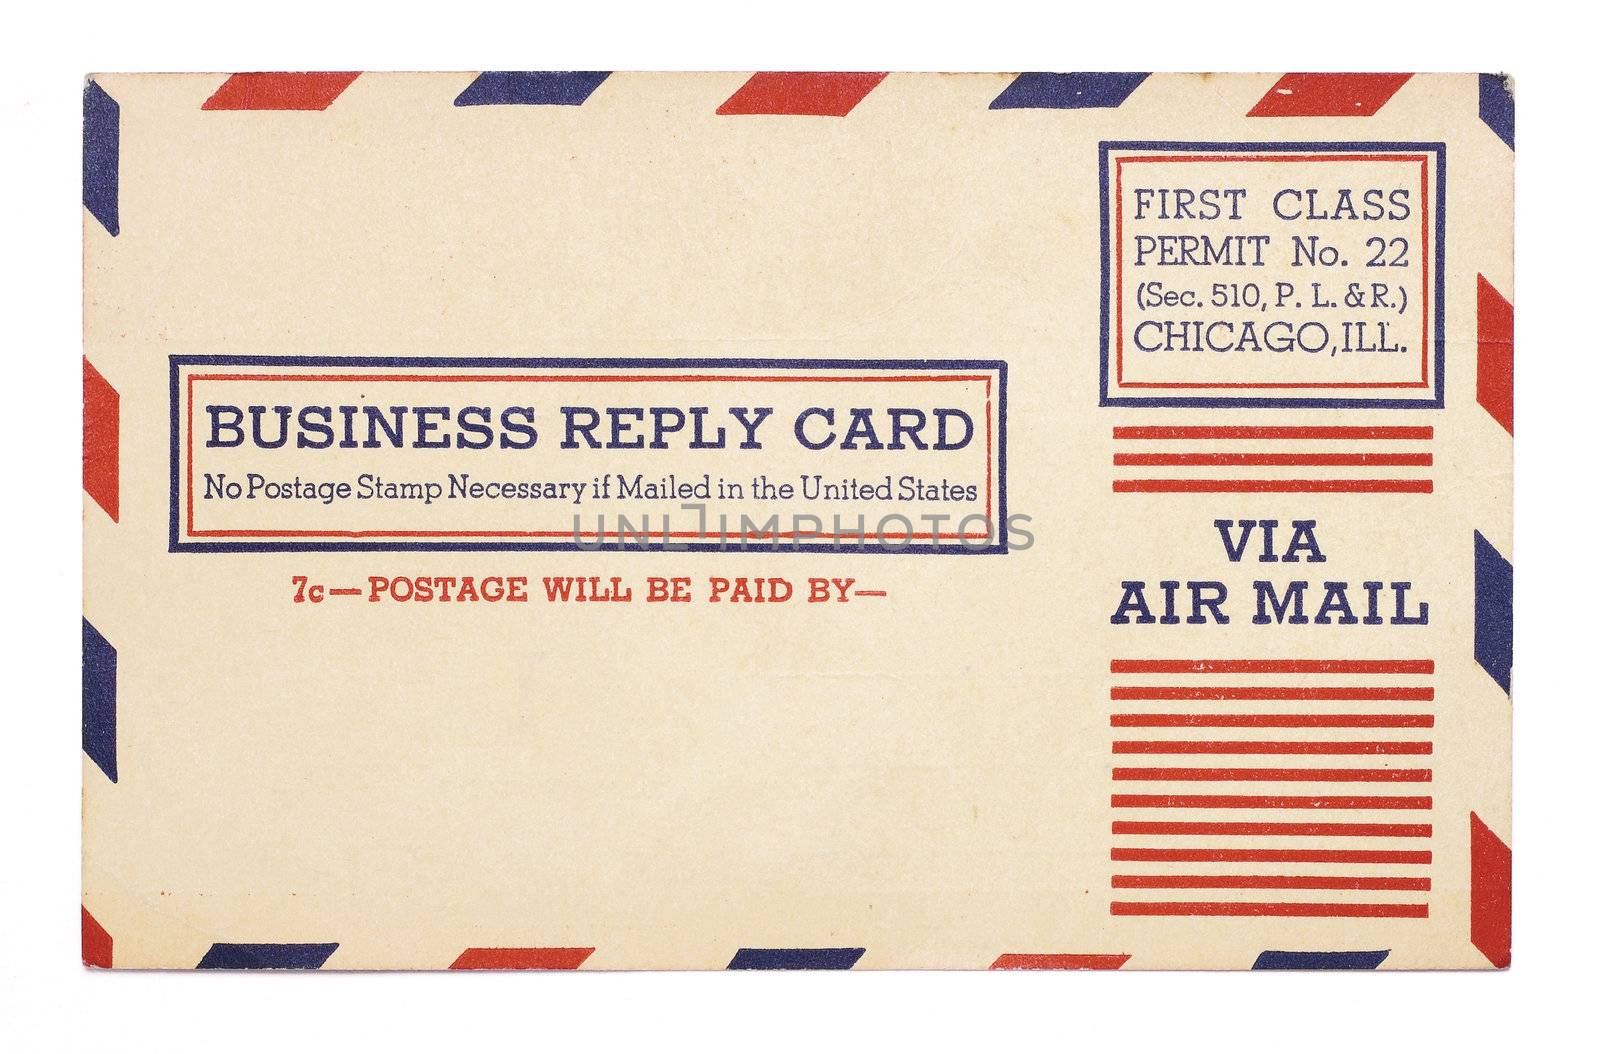 Vintage United States Airmail Business Reply Card
Vintage United by Em3